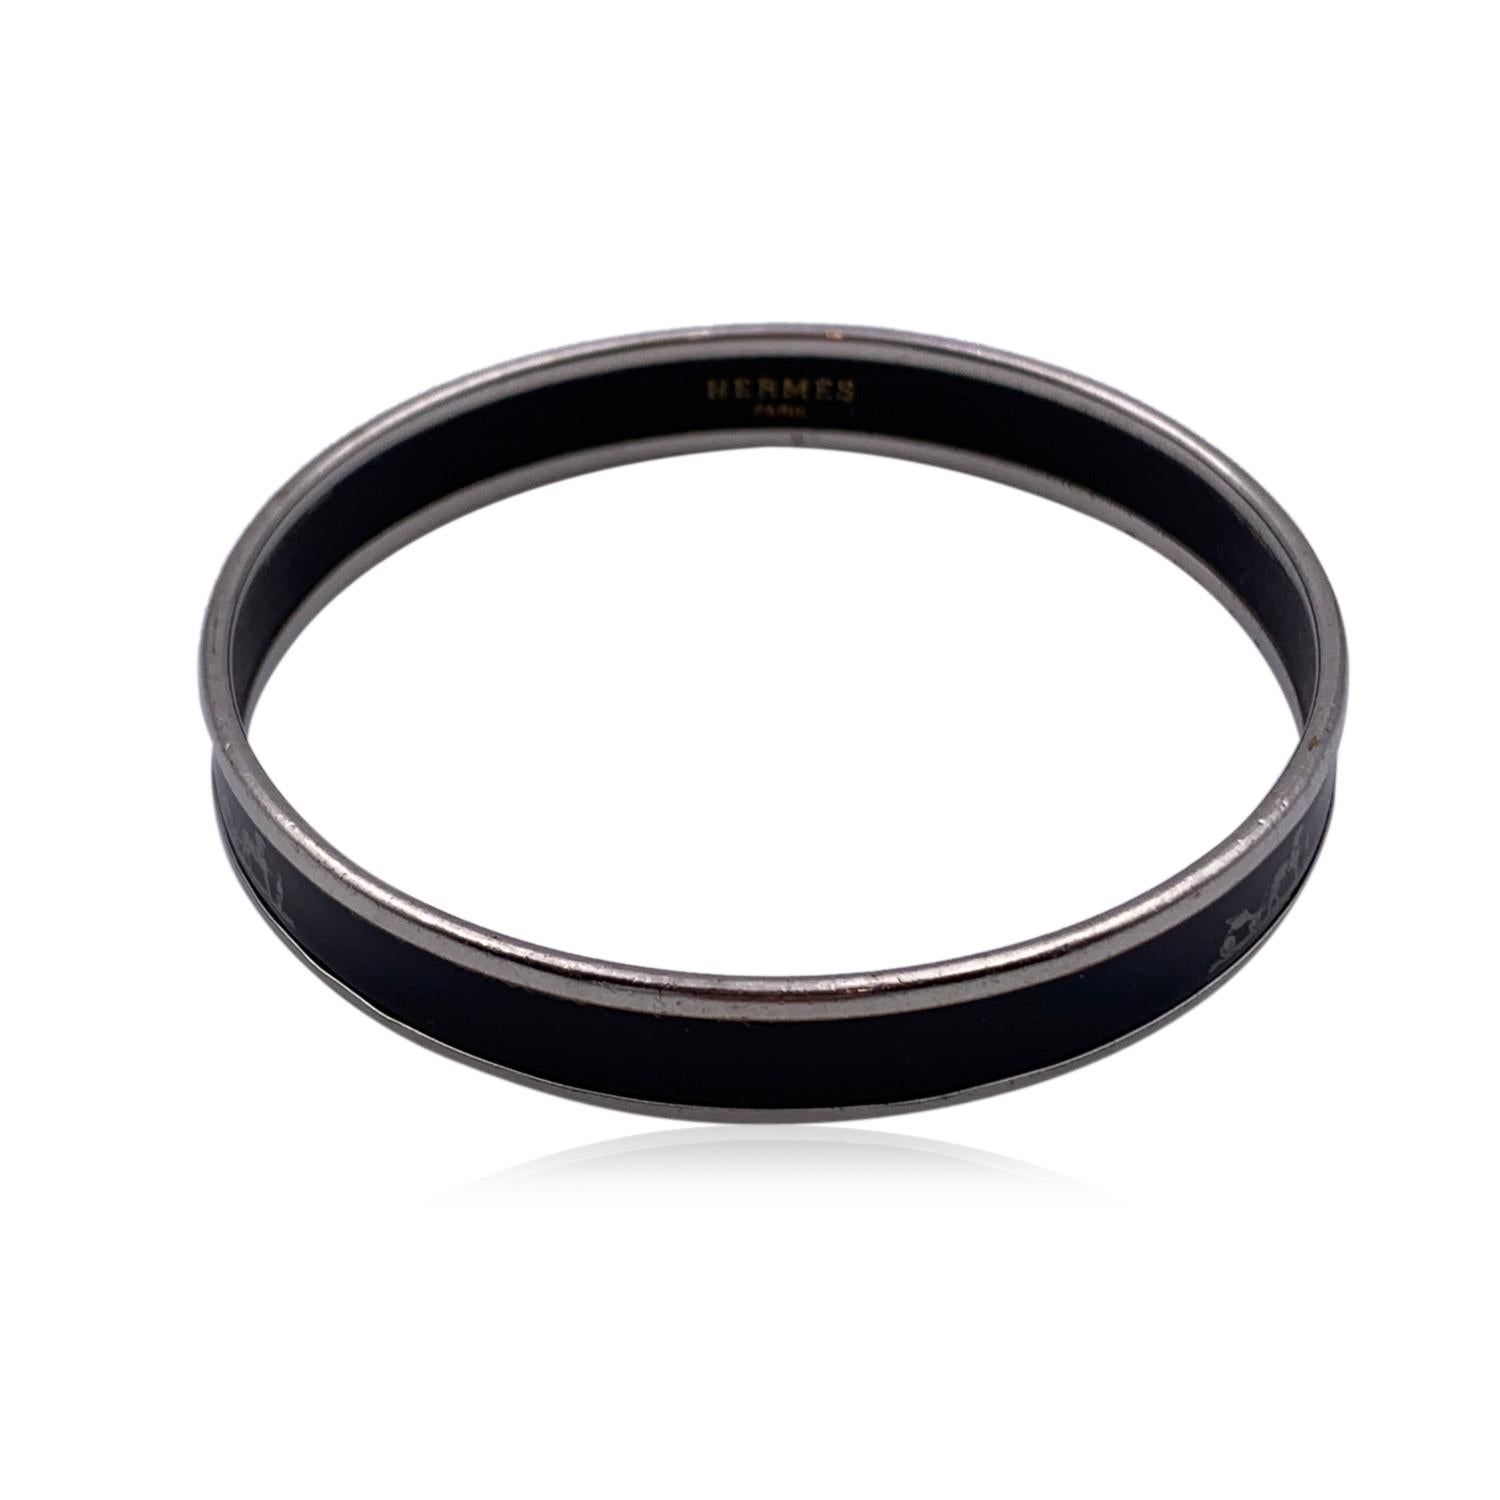 A stunning enameled 'Caleche' bangle bracelet by HERMES in black color. Iconic Hermes gig motif and palladium rim. Black enameled interior. Inner diameter: approx. 2.5 inches -' 6.4 cm. HERMES Paris' & 'Made in Austria' embossed inside the